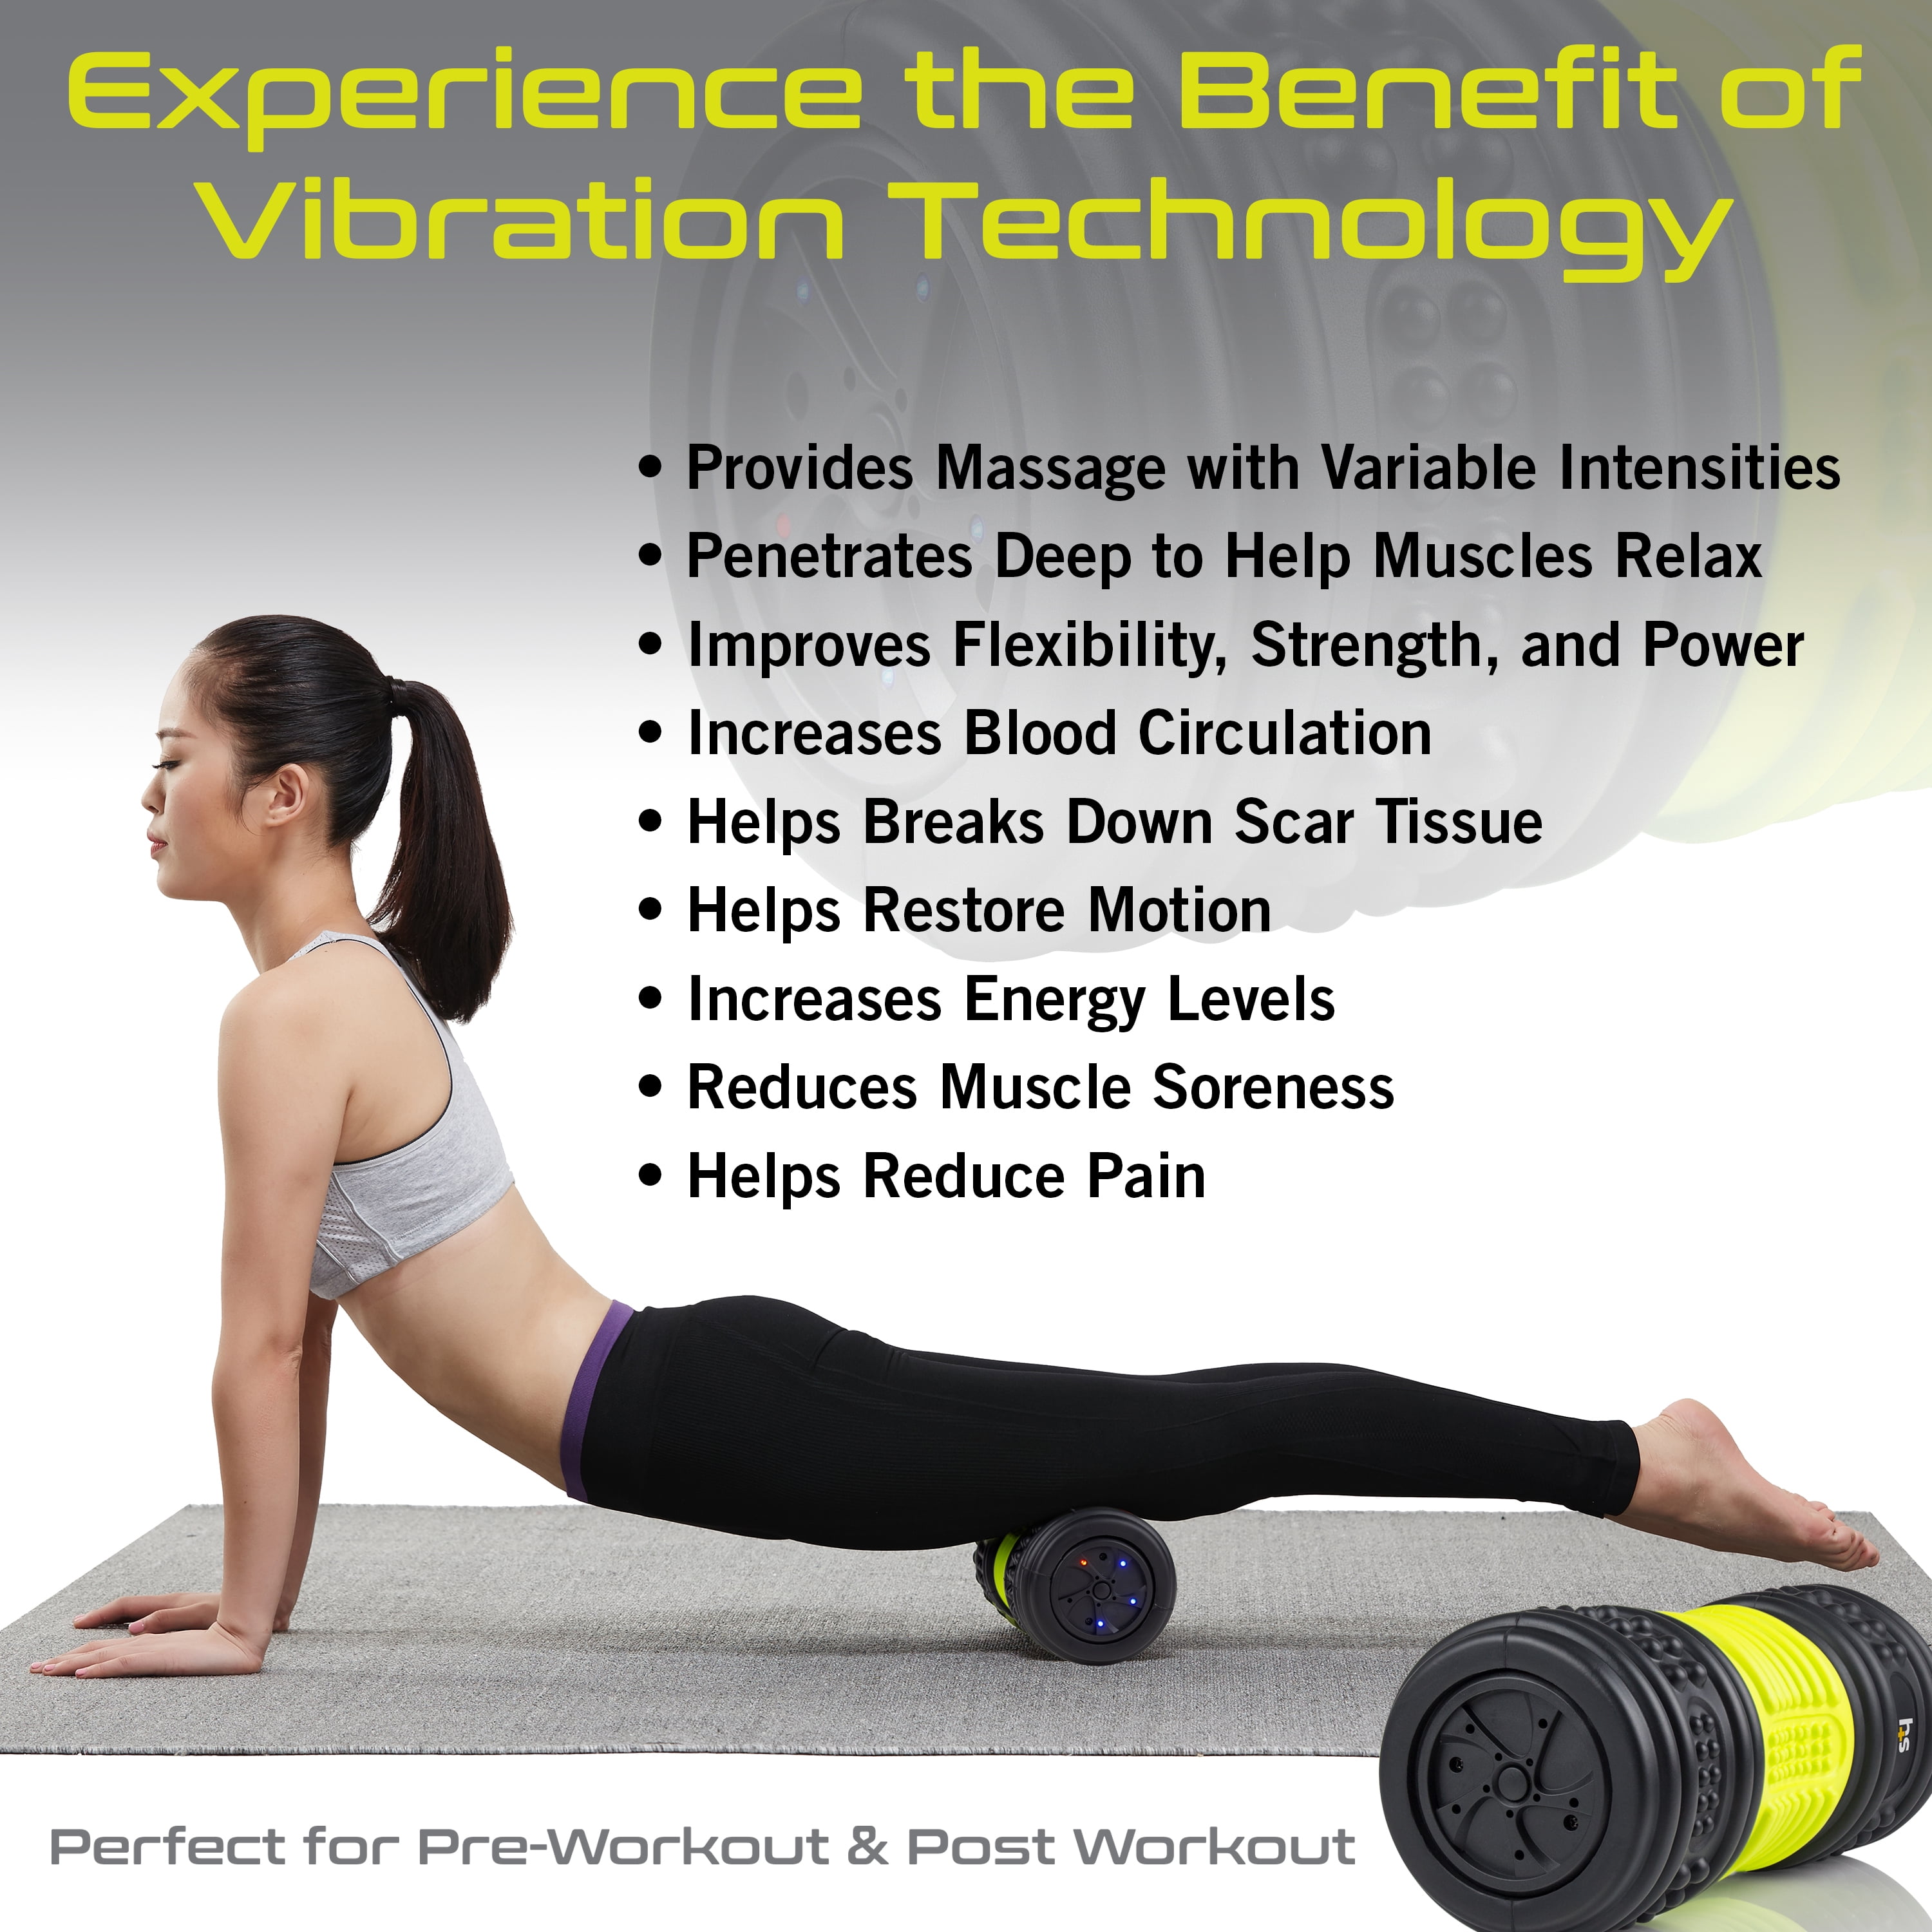 Deep Tissue Trigger Point Massage Therapy Fitness High-Density Vibranting Back Massager High Intensity Vibration for Sports Recovery Kinetic Phase 8-Speed Vibrating Foam Roller with Glute Bands 